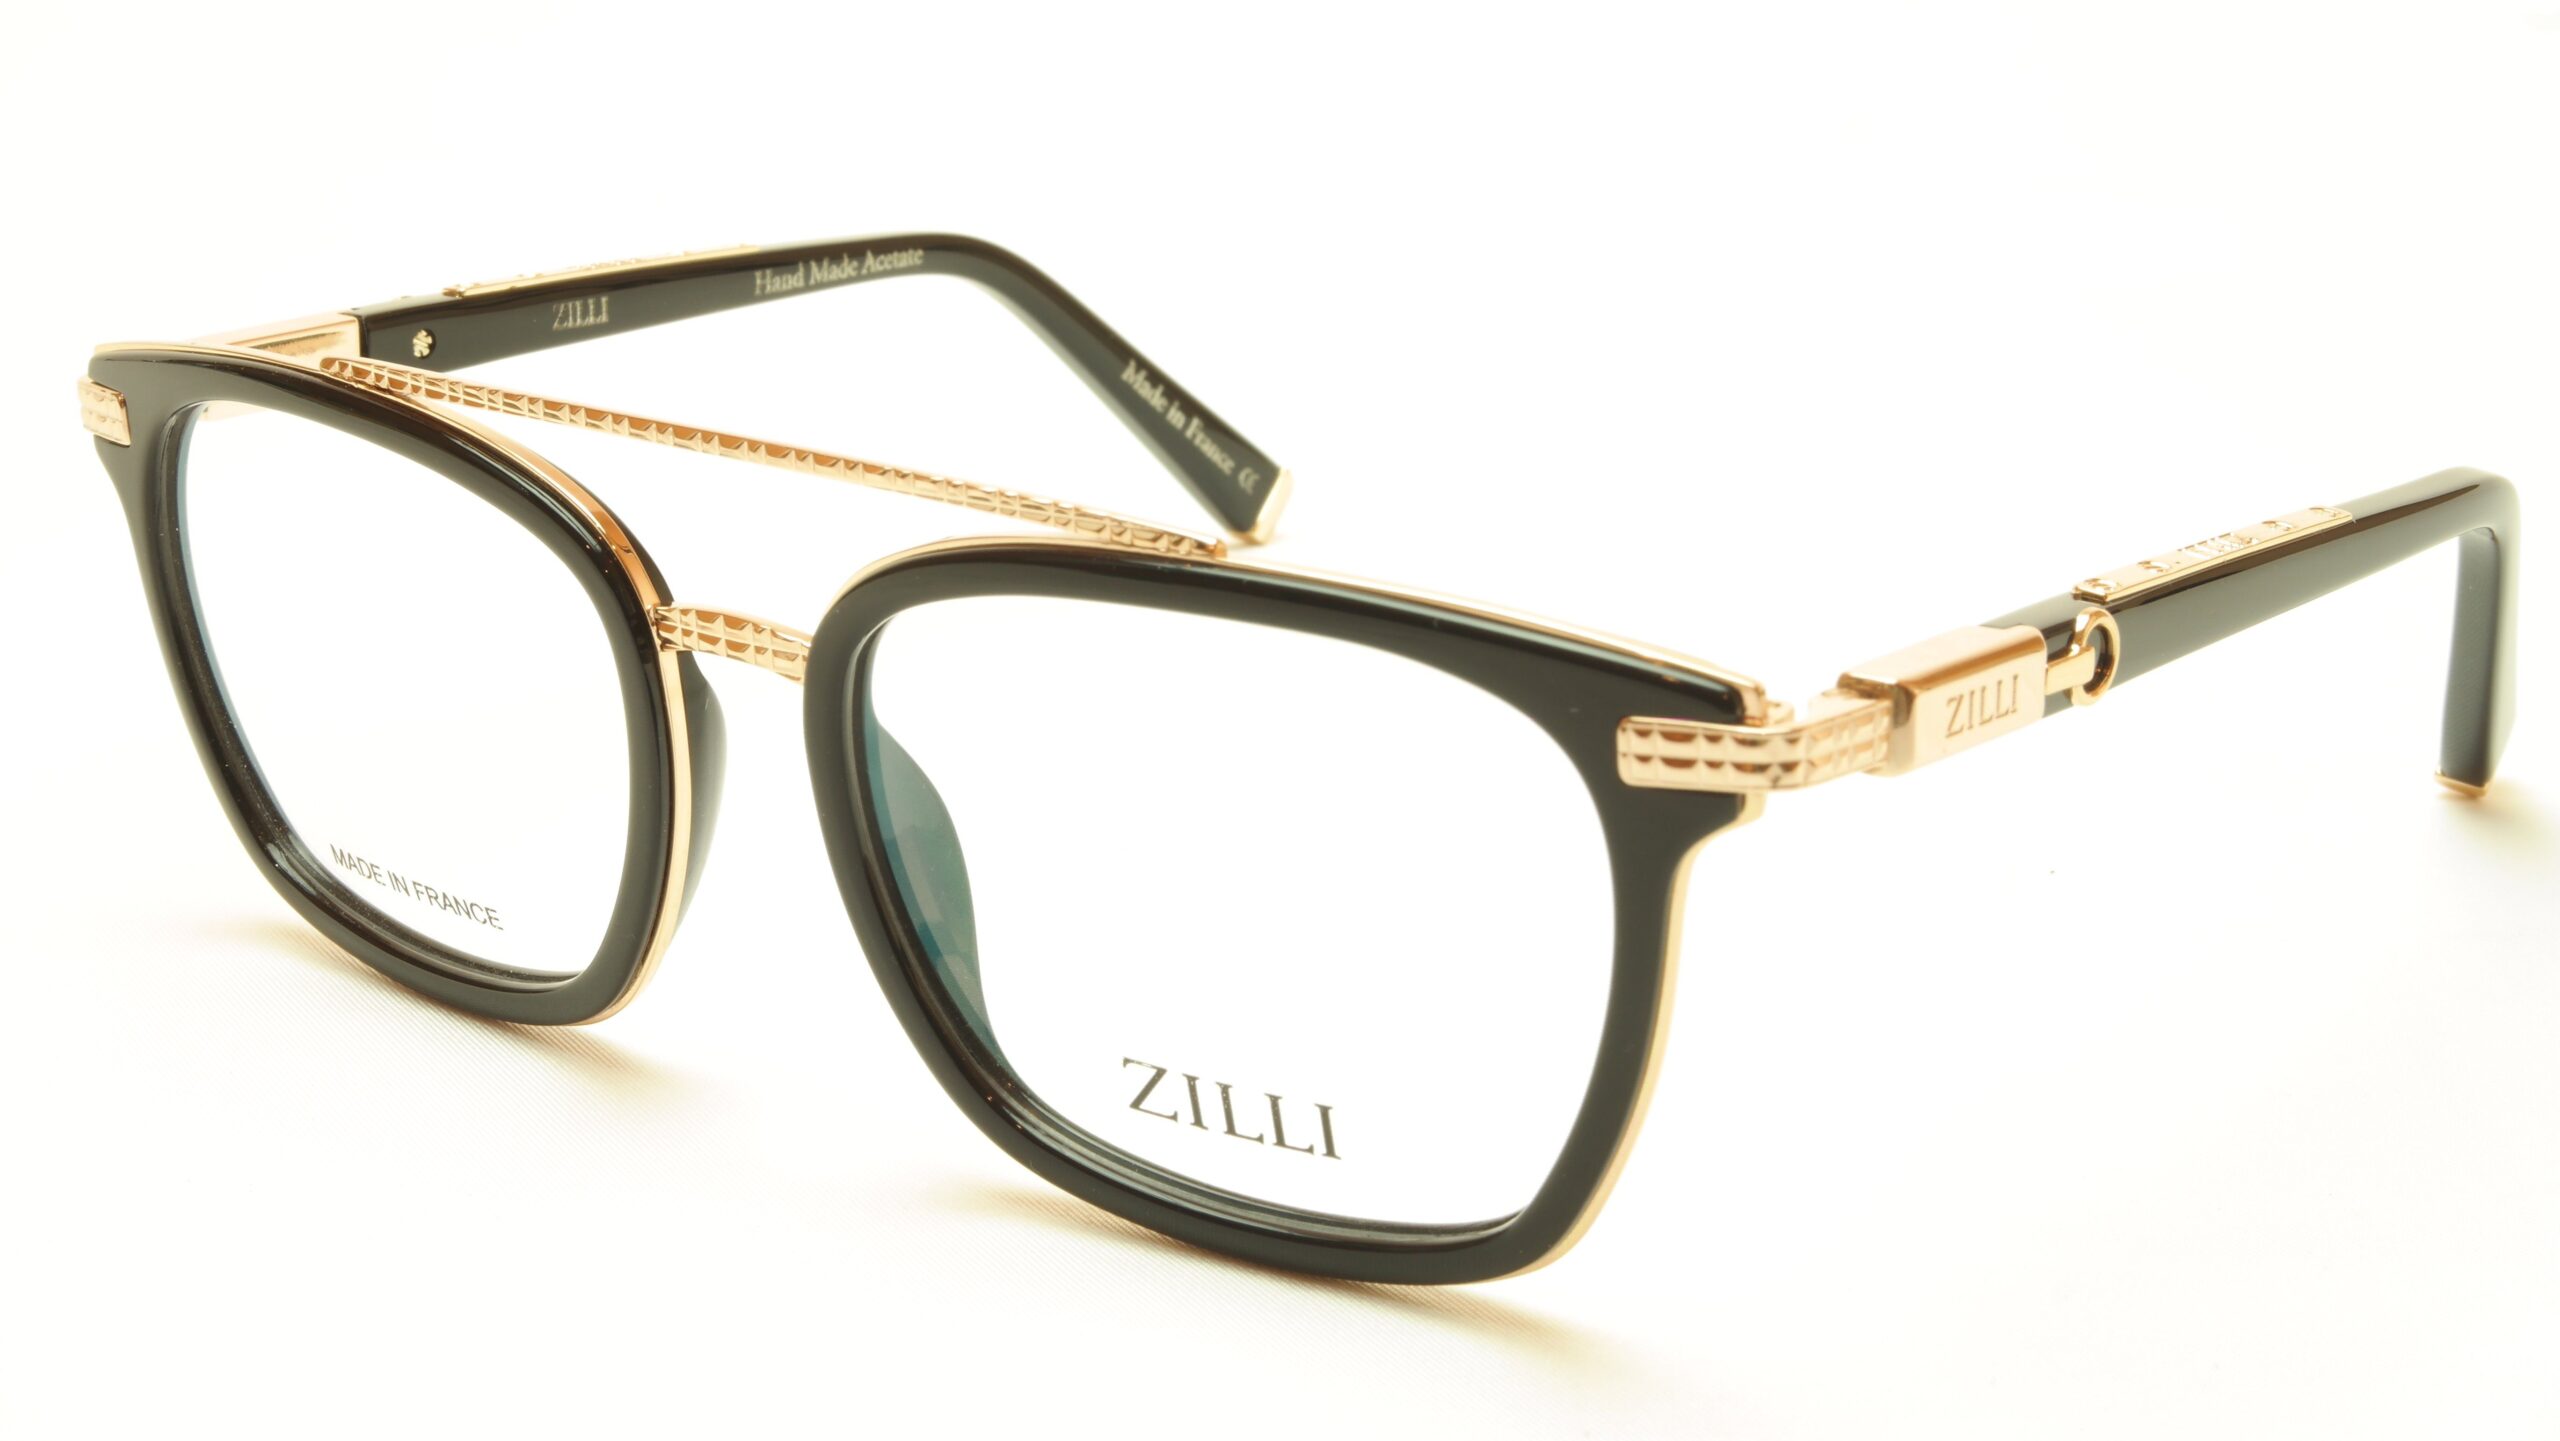 Combination of Black and Gold Shape a Fashionable Style in Glasses